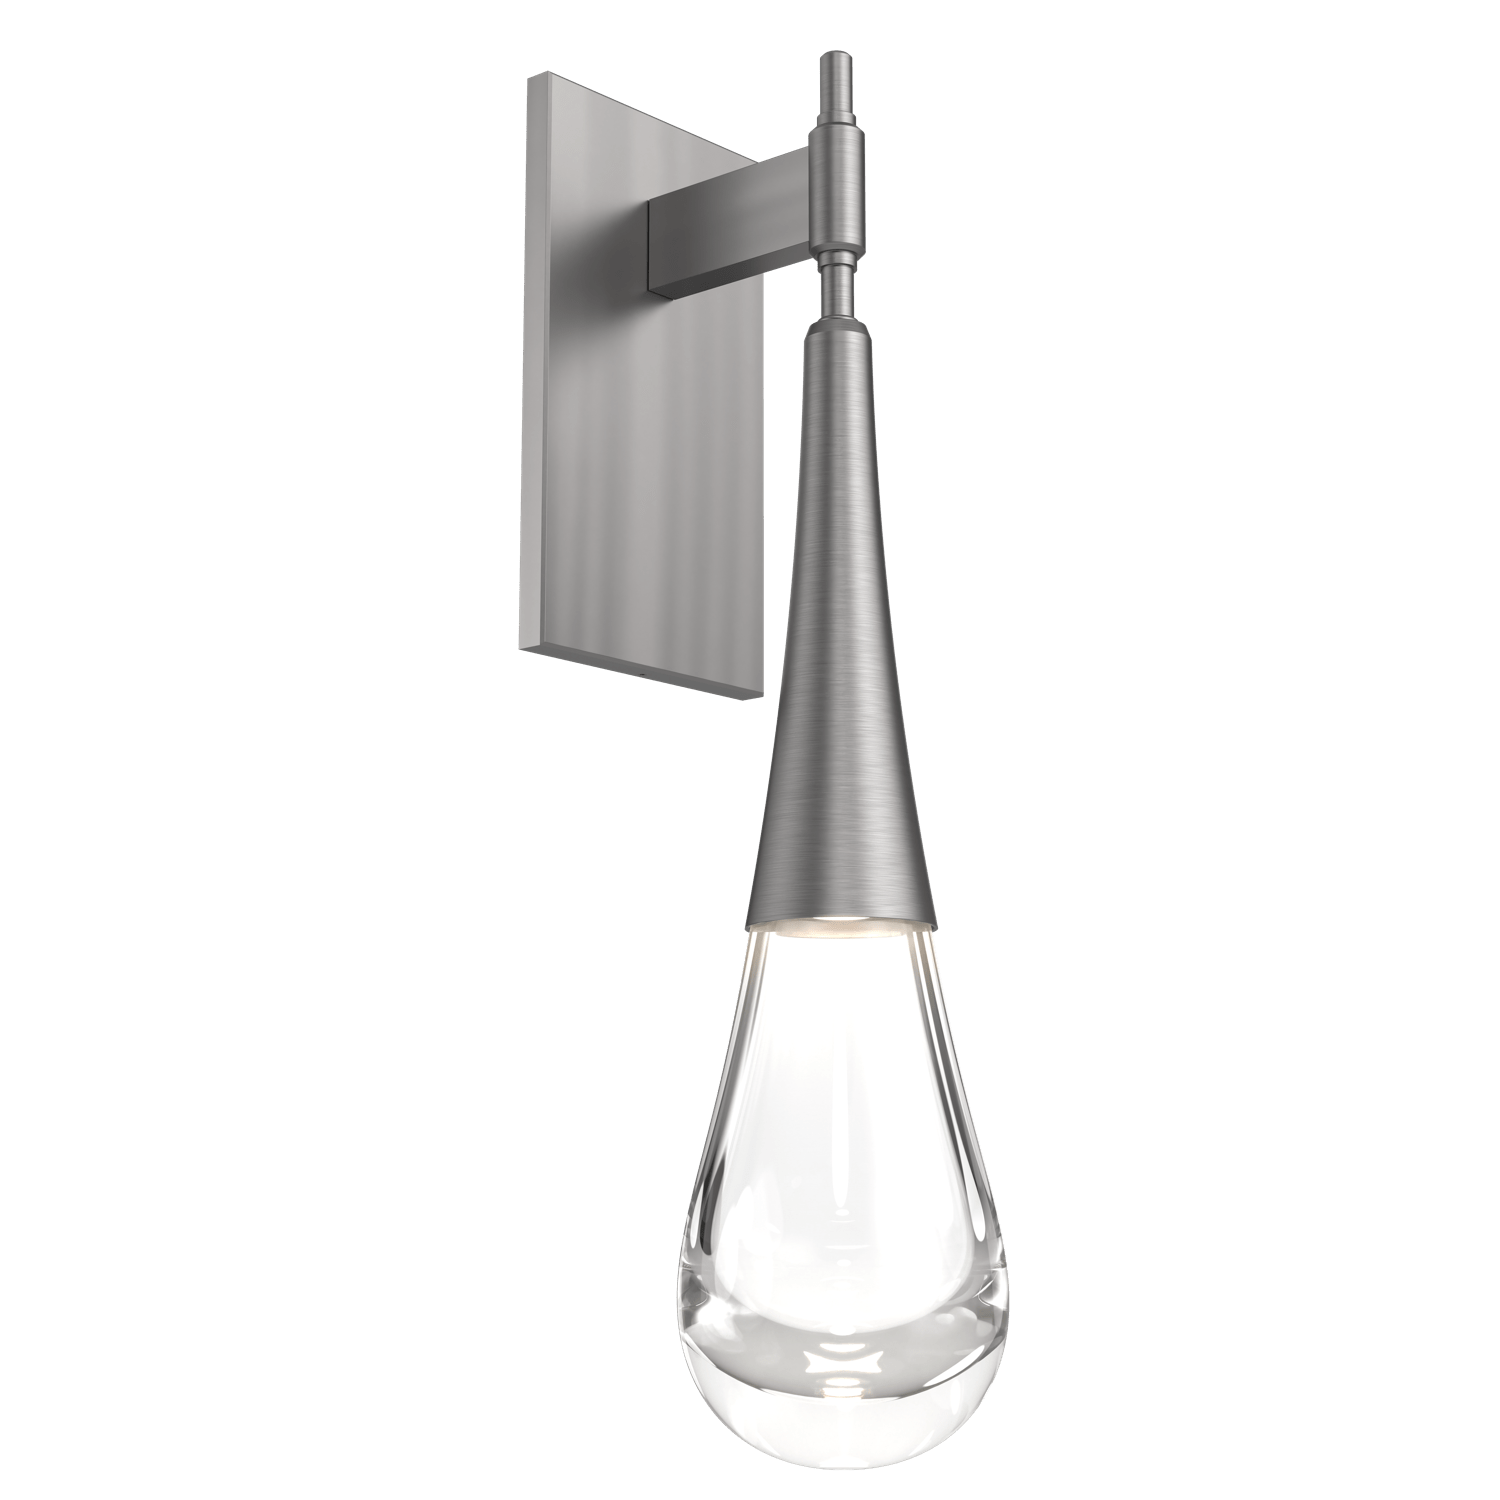 IDB0078-01-SN-Hammerton-Studio-Raindrop-wall-sconce-with-satin-nickel-finish-and-clear-blown-glass-shades-and-LED-lamping